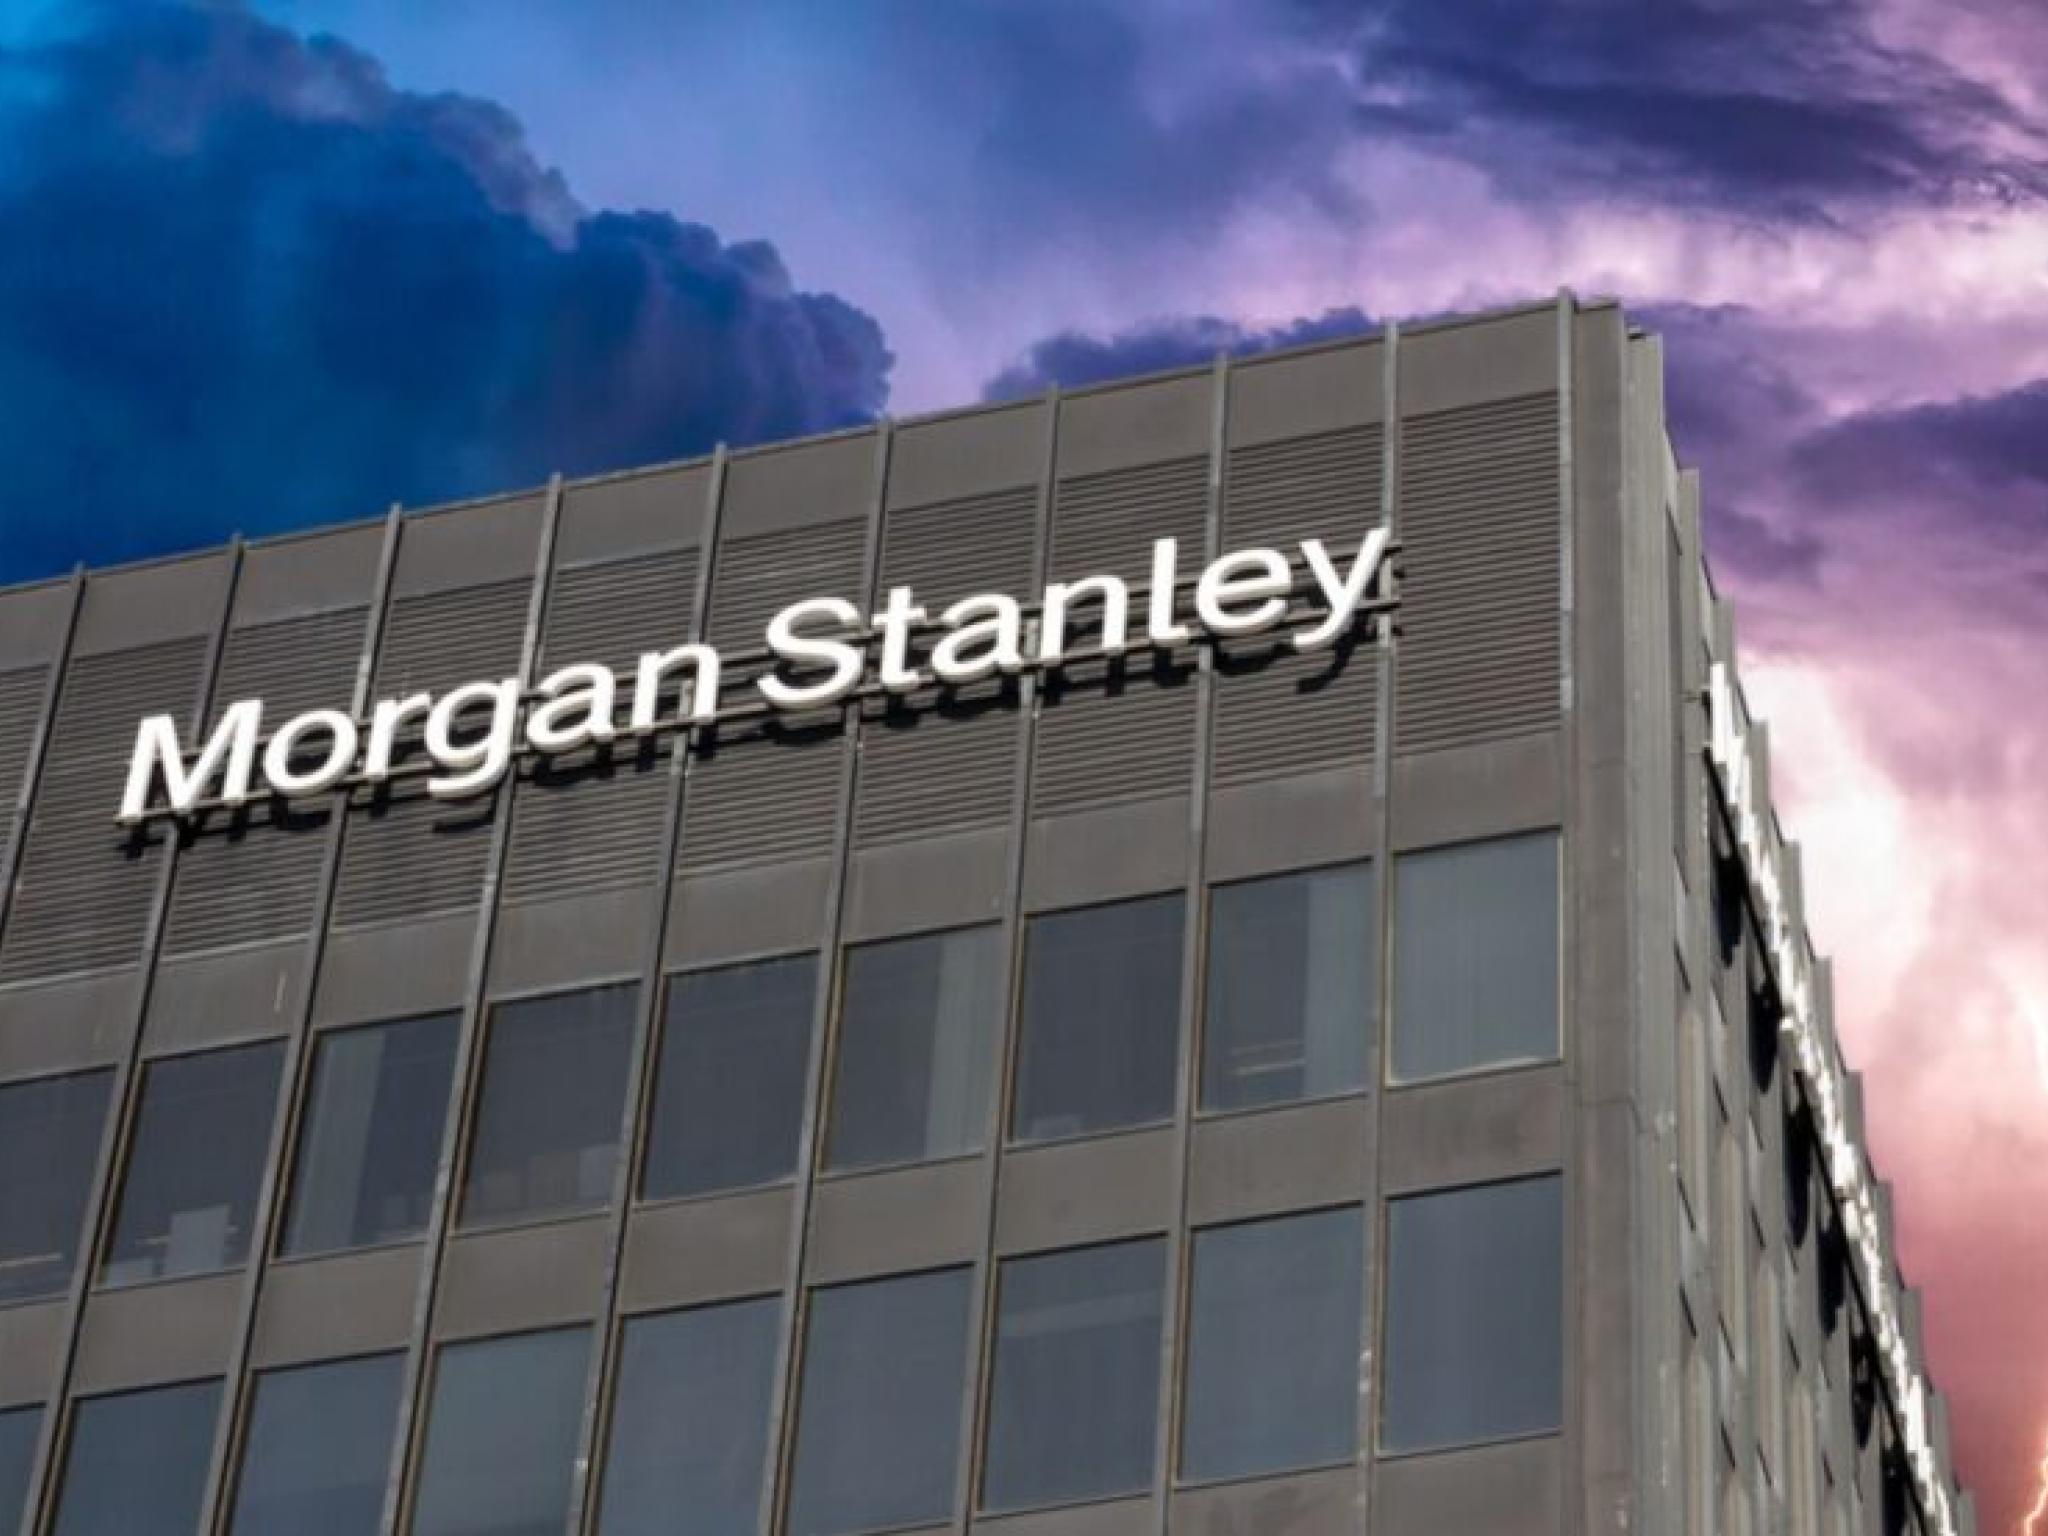  morgan-stanley-to-roll-out-openai-powered-assistant-for-financial-advisors-quality-and-depth-of-the-notes-are-just-significantly-better 